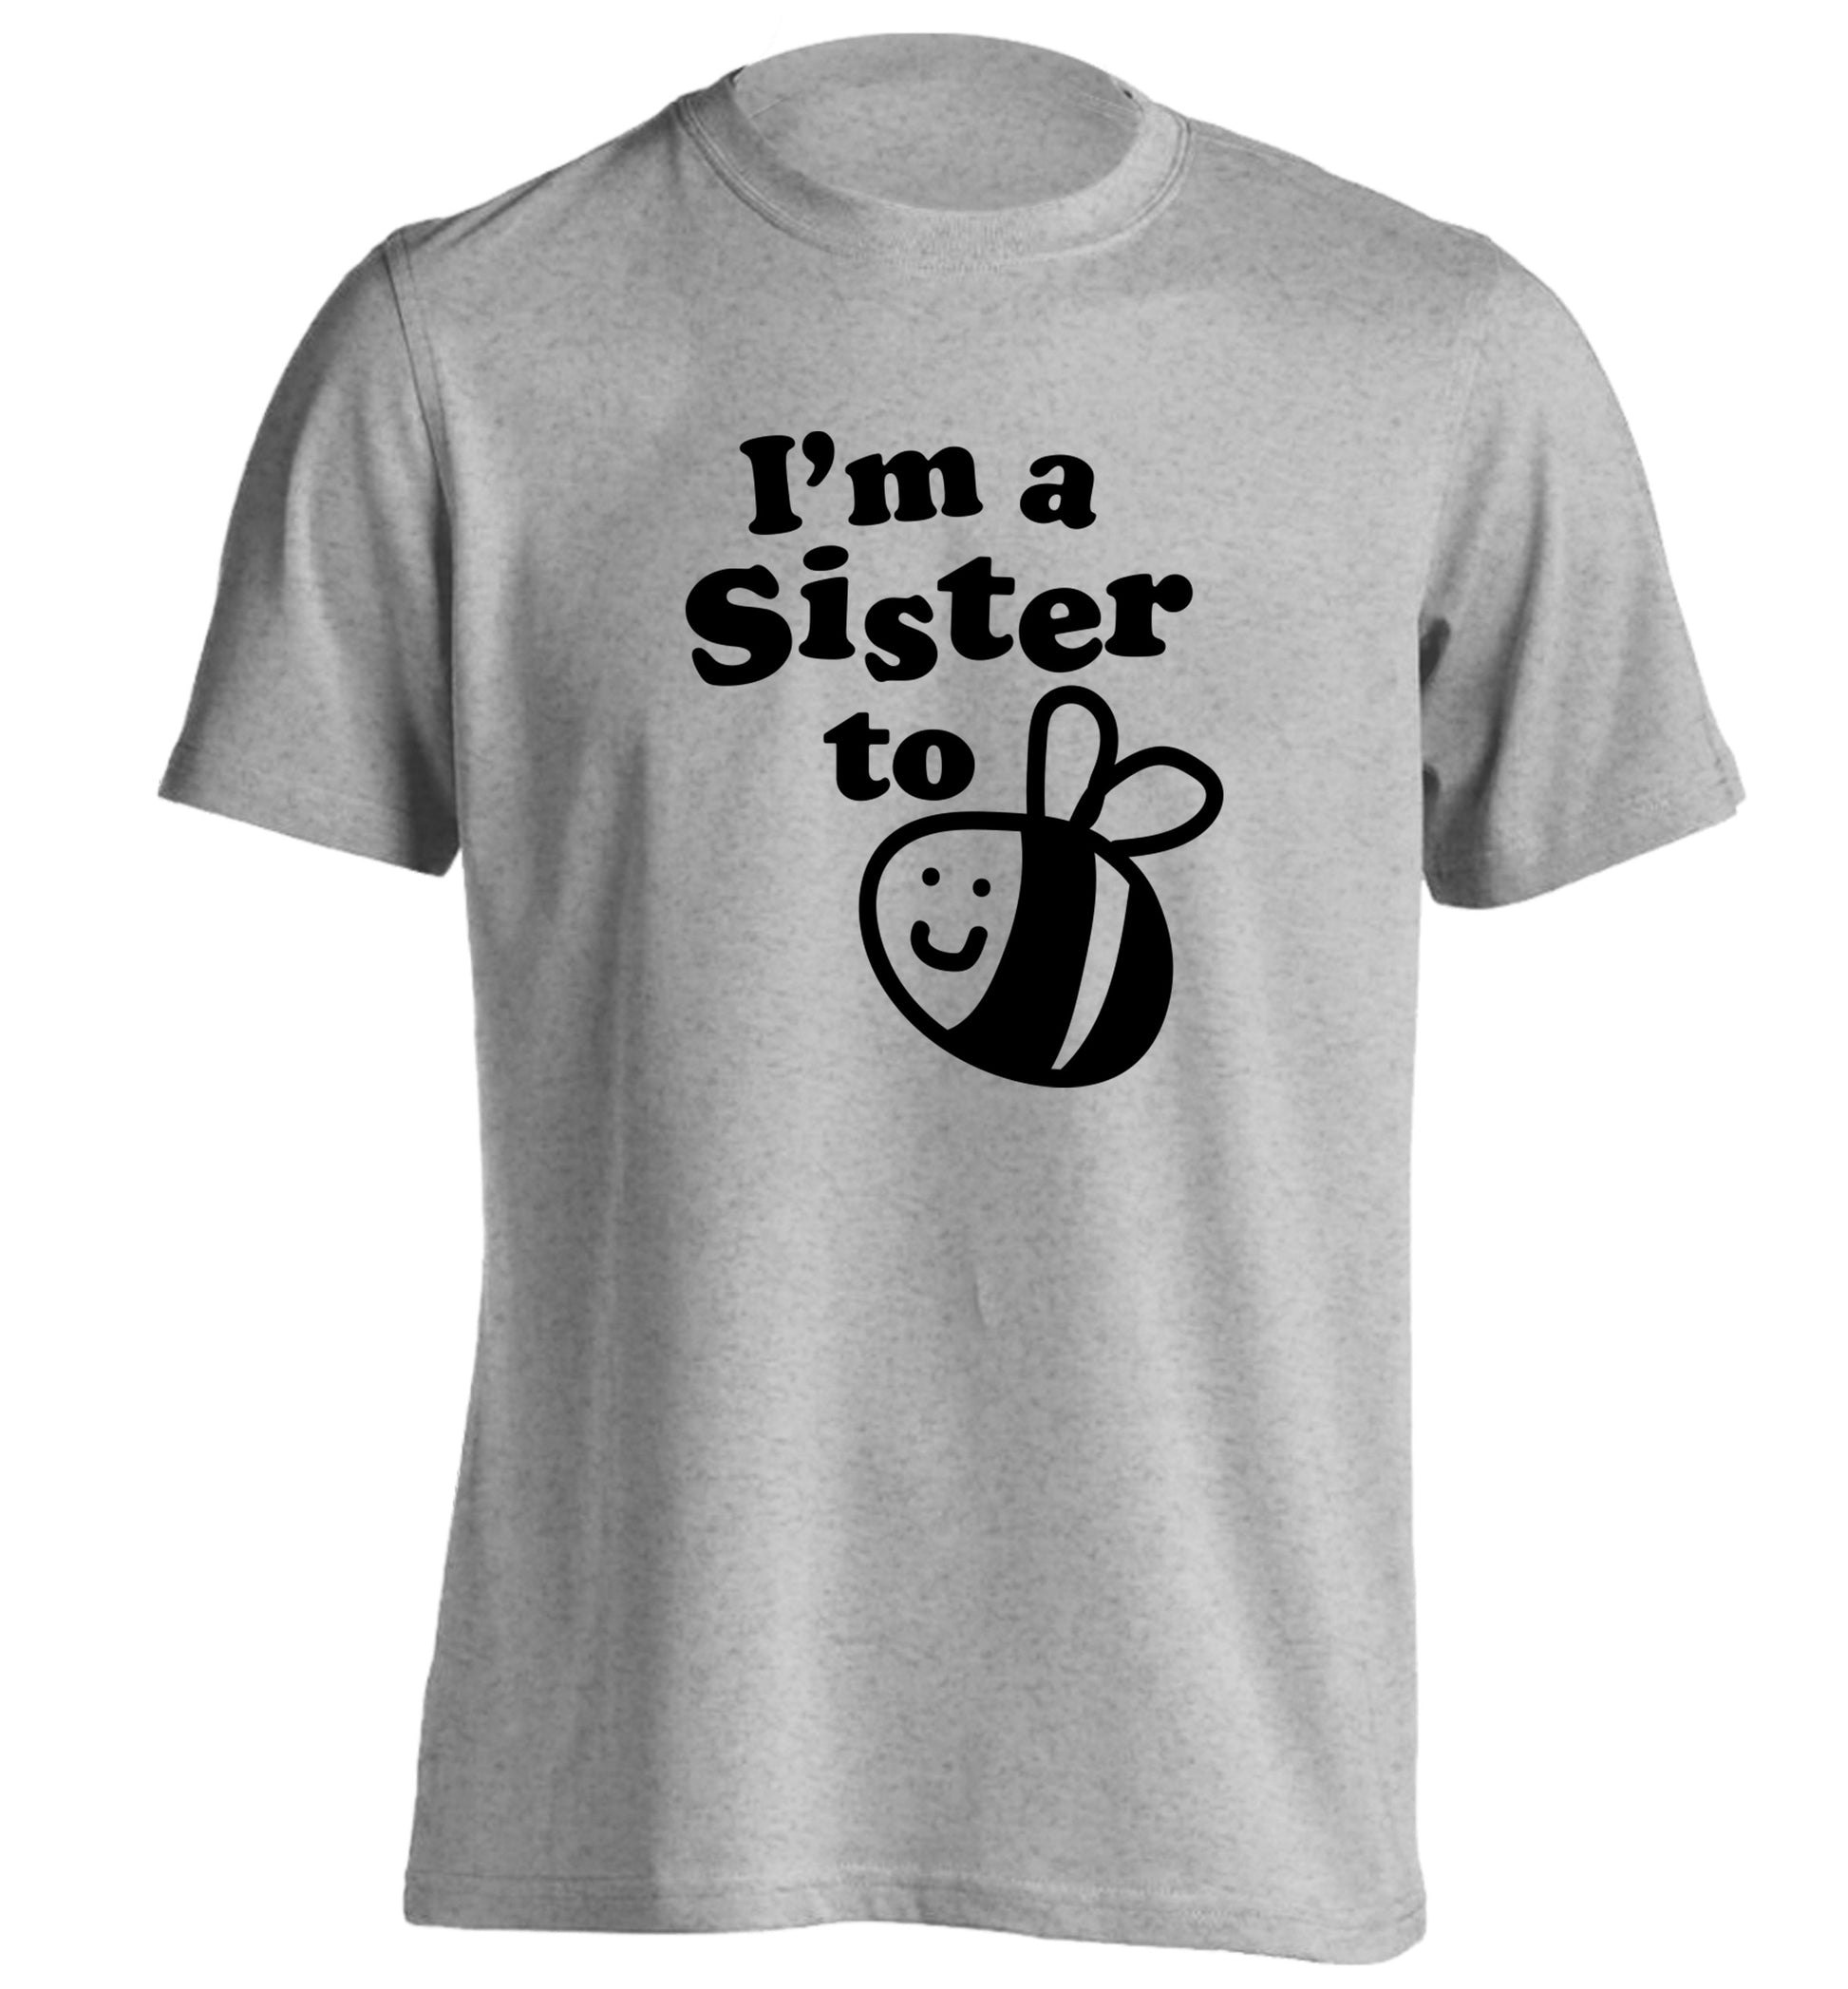 I'm a sister to be adults unisex grey Tshirt 2XL